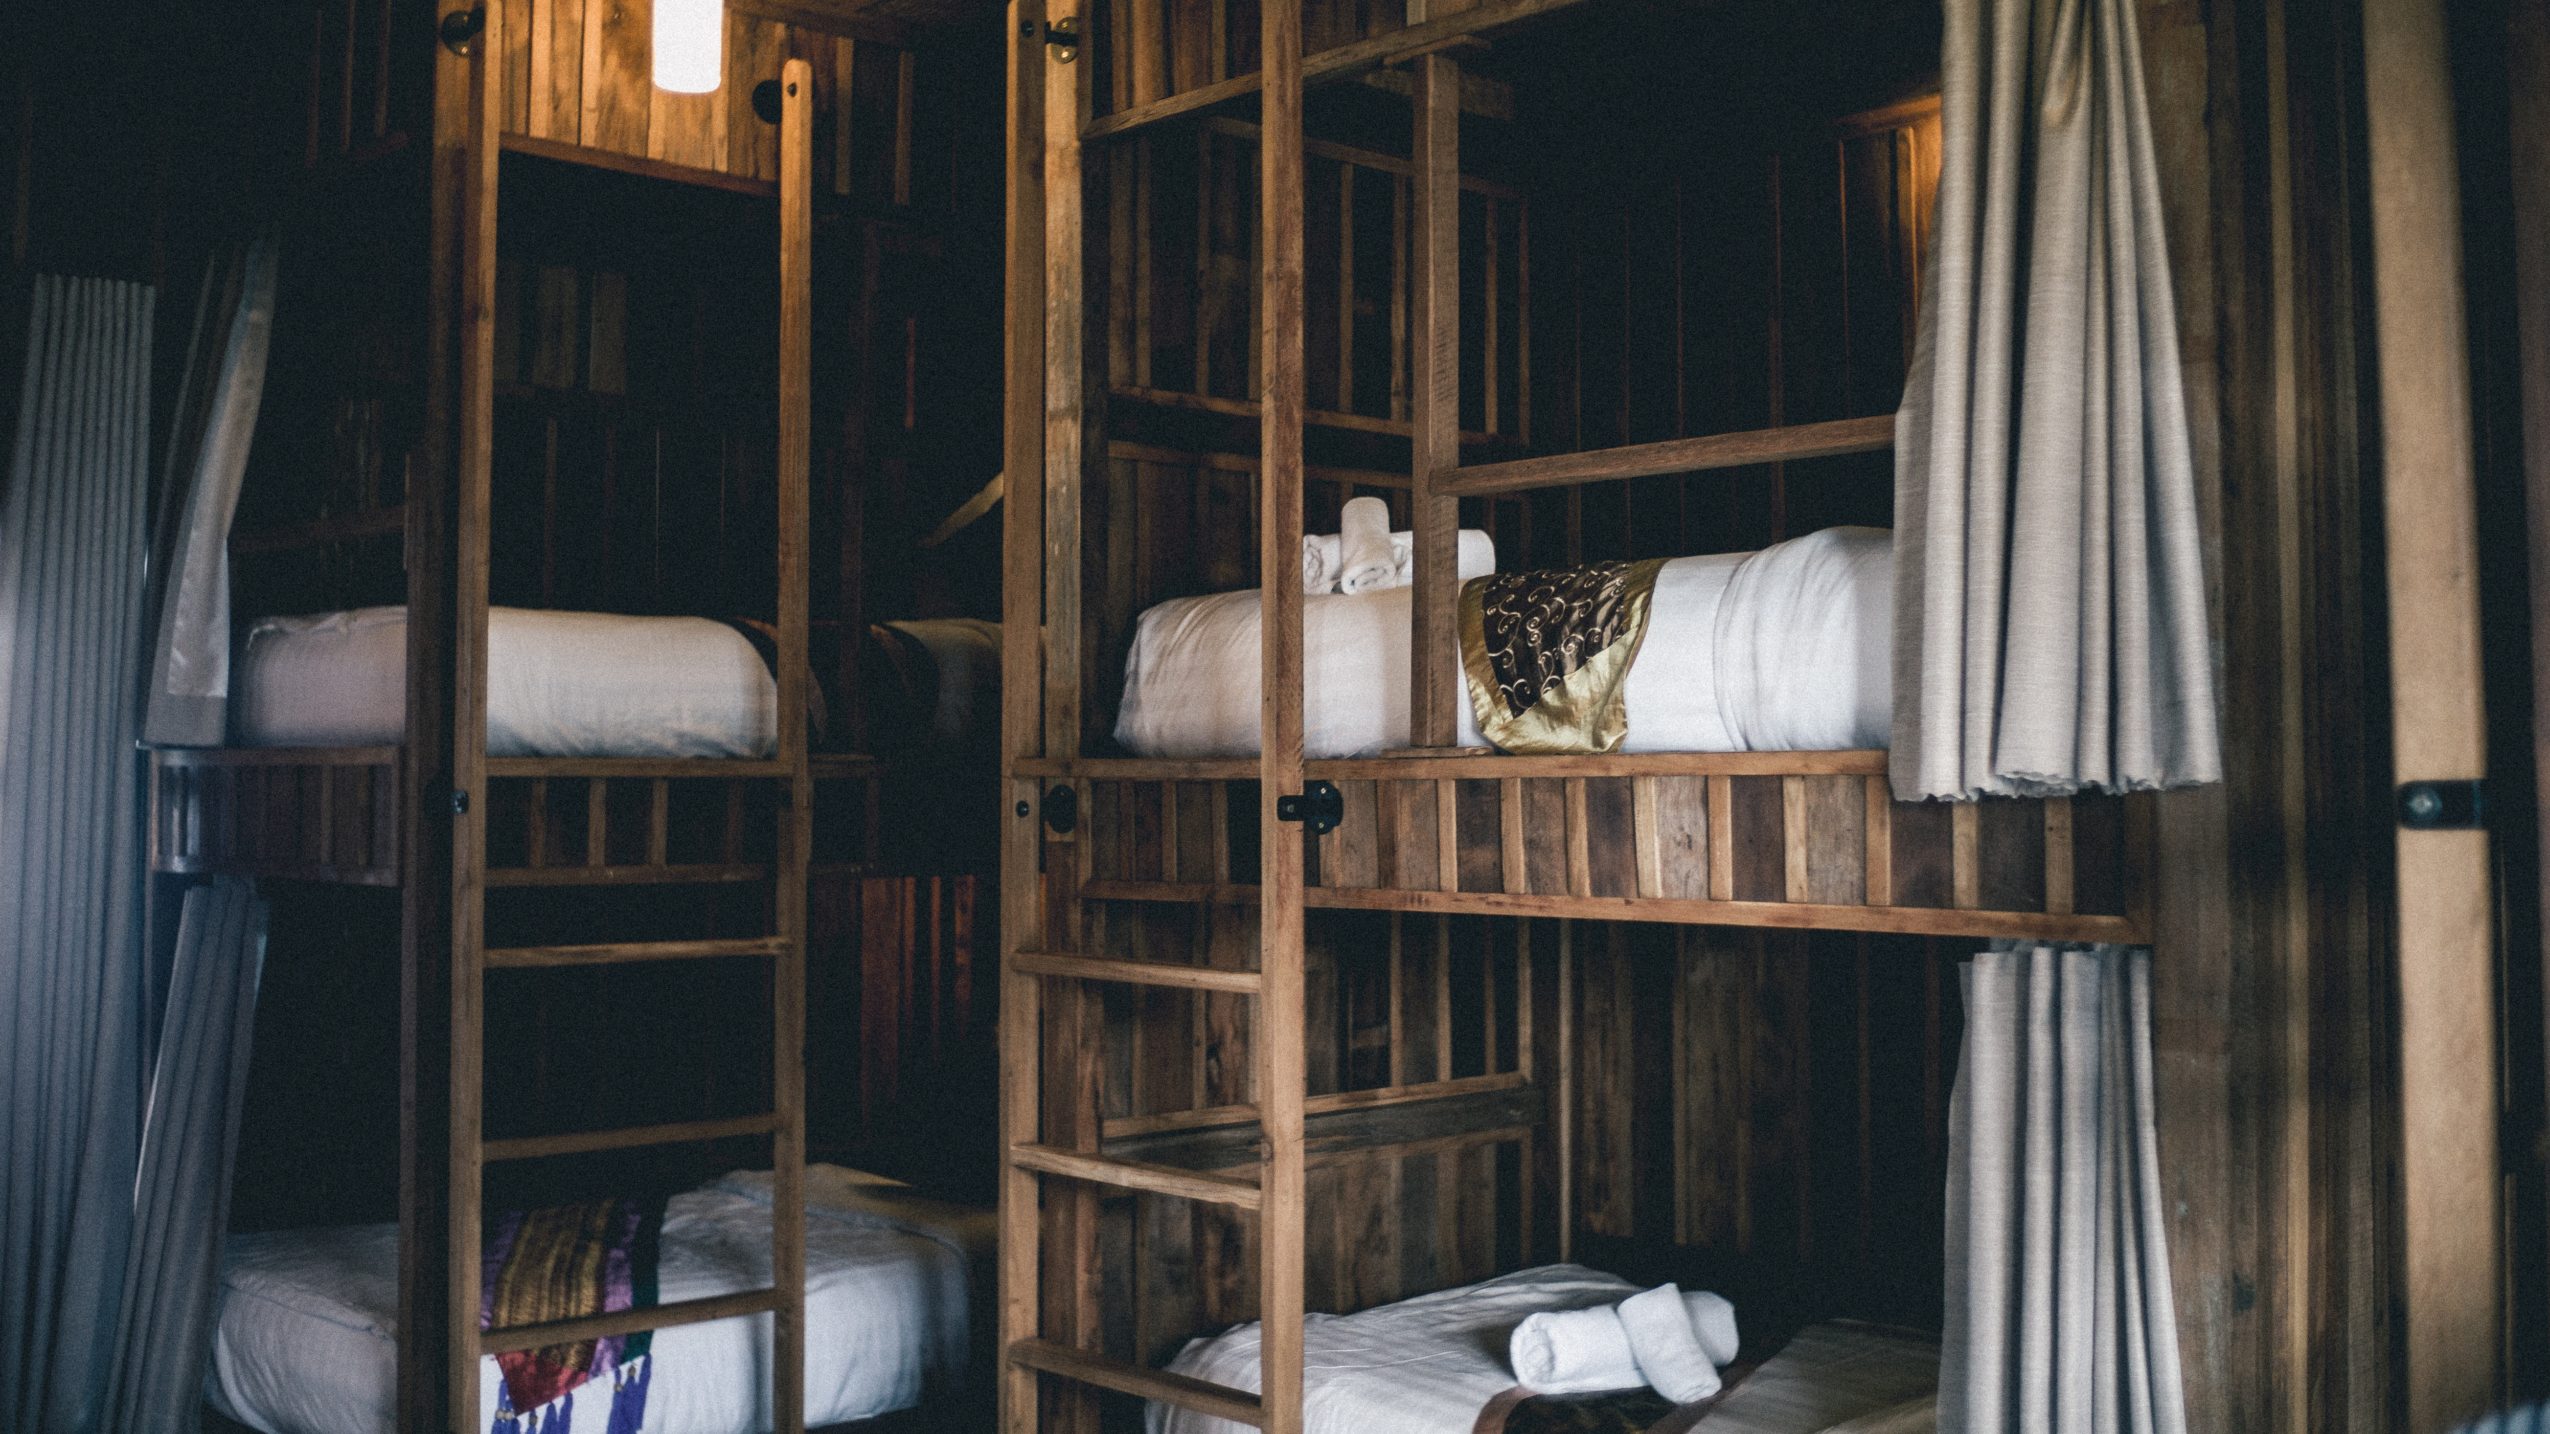 Staying in a hostel for the first time? Read these 10 tips!